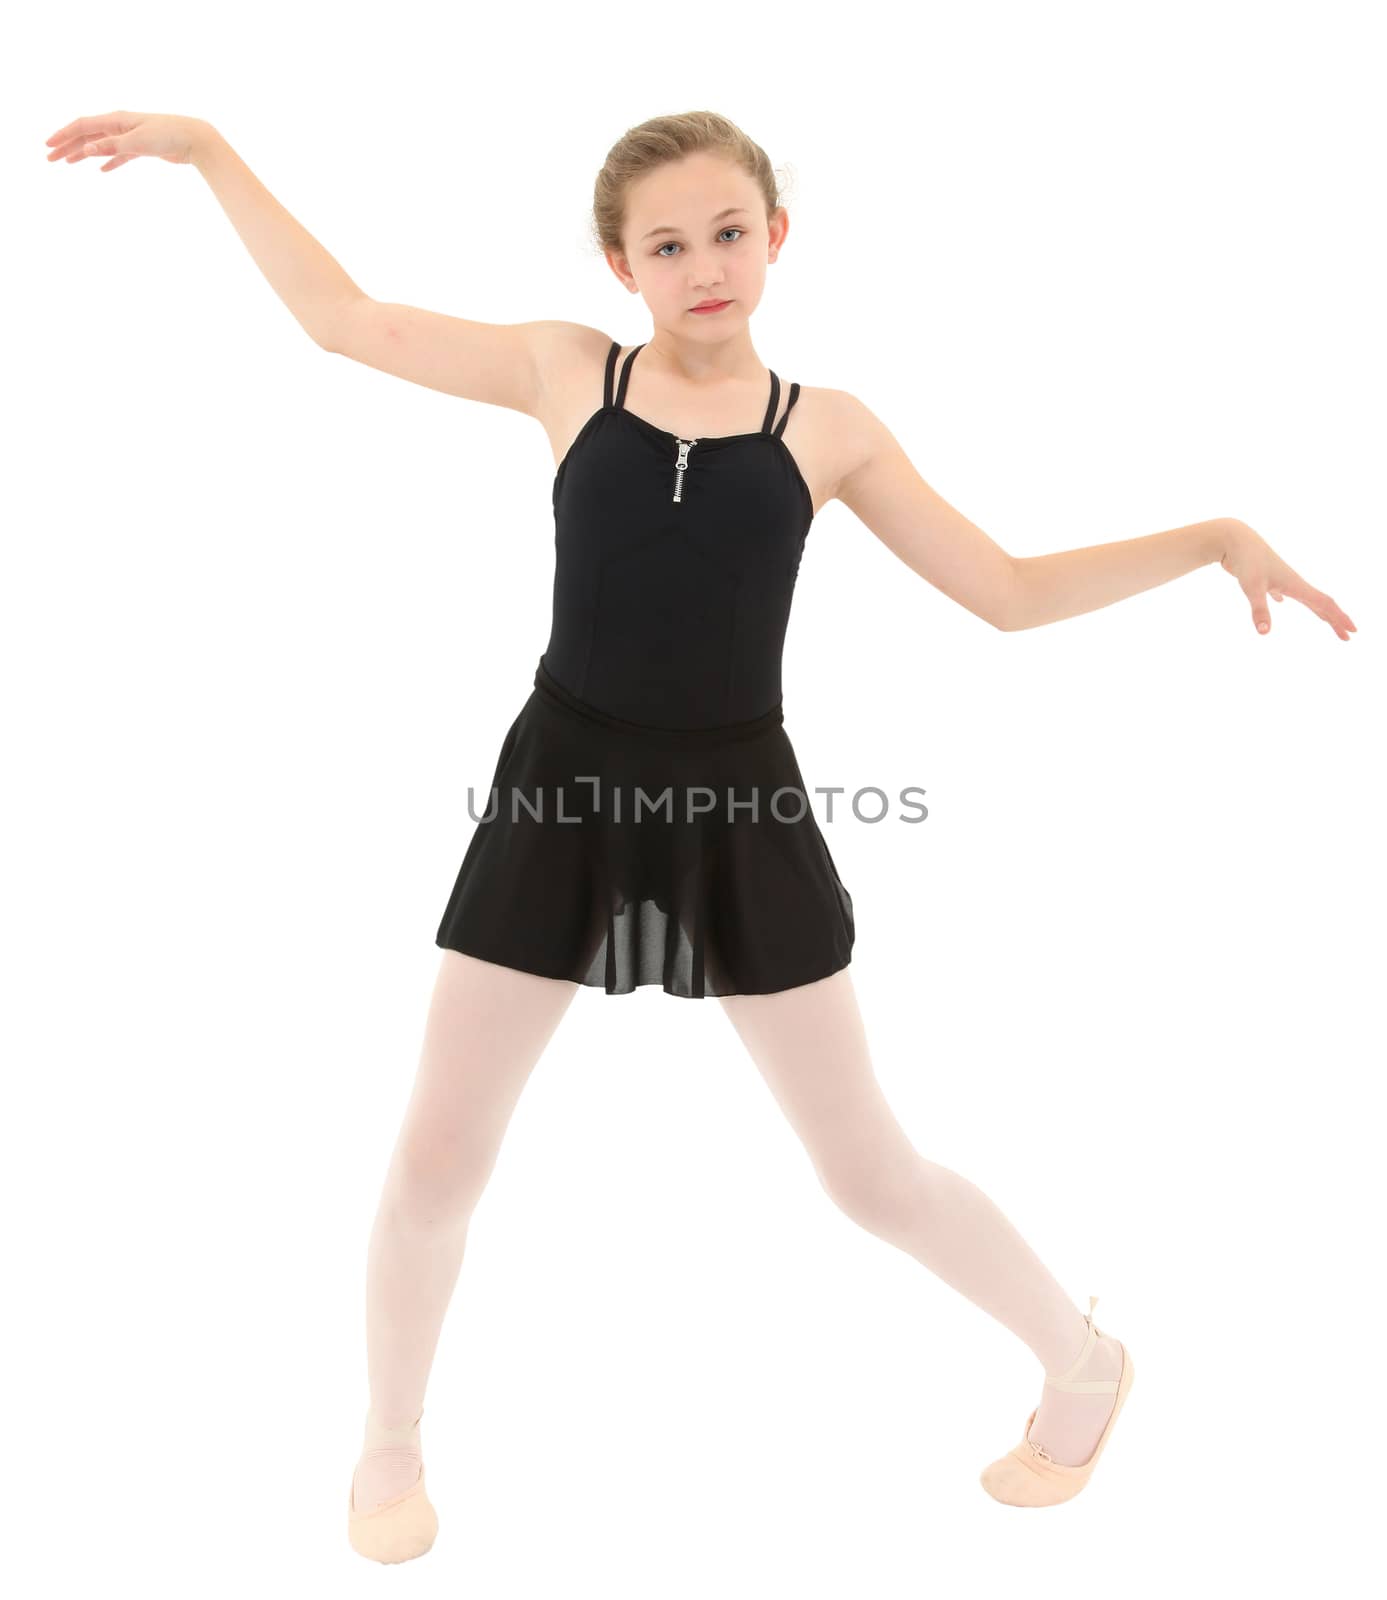 Spastic little dancer girl dancing poorly over white with clipping path.